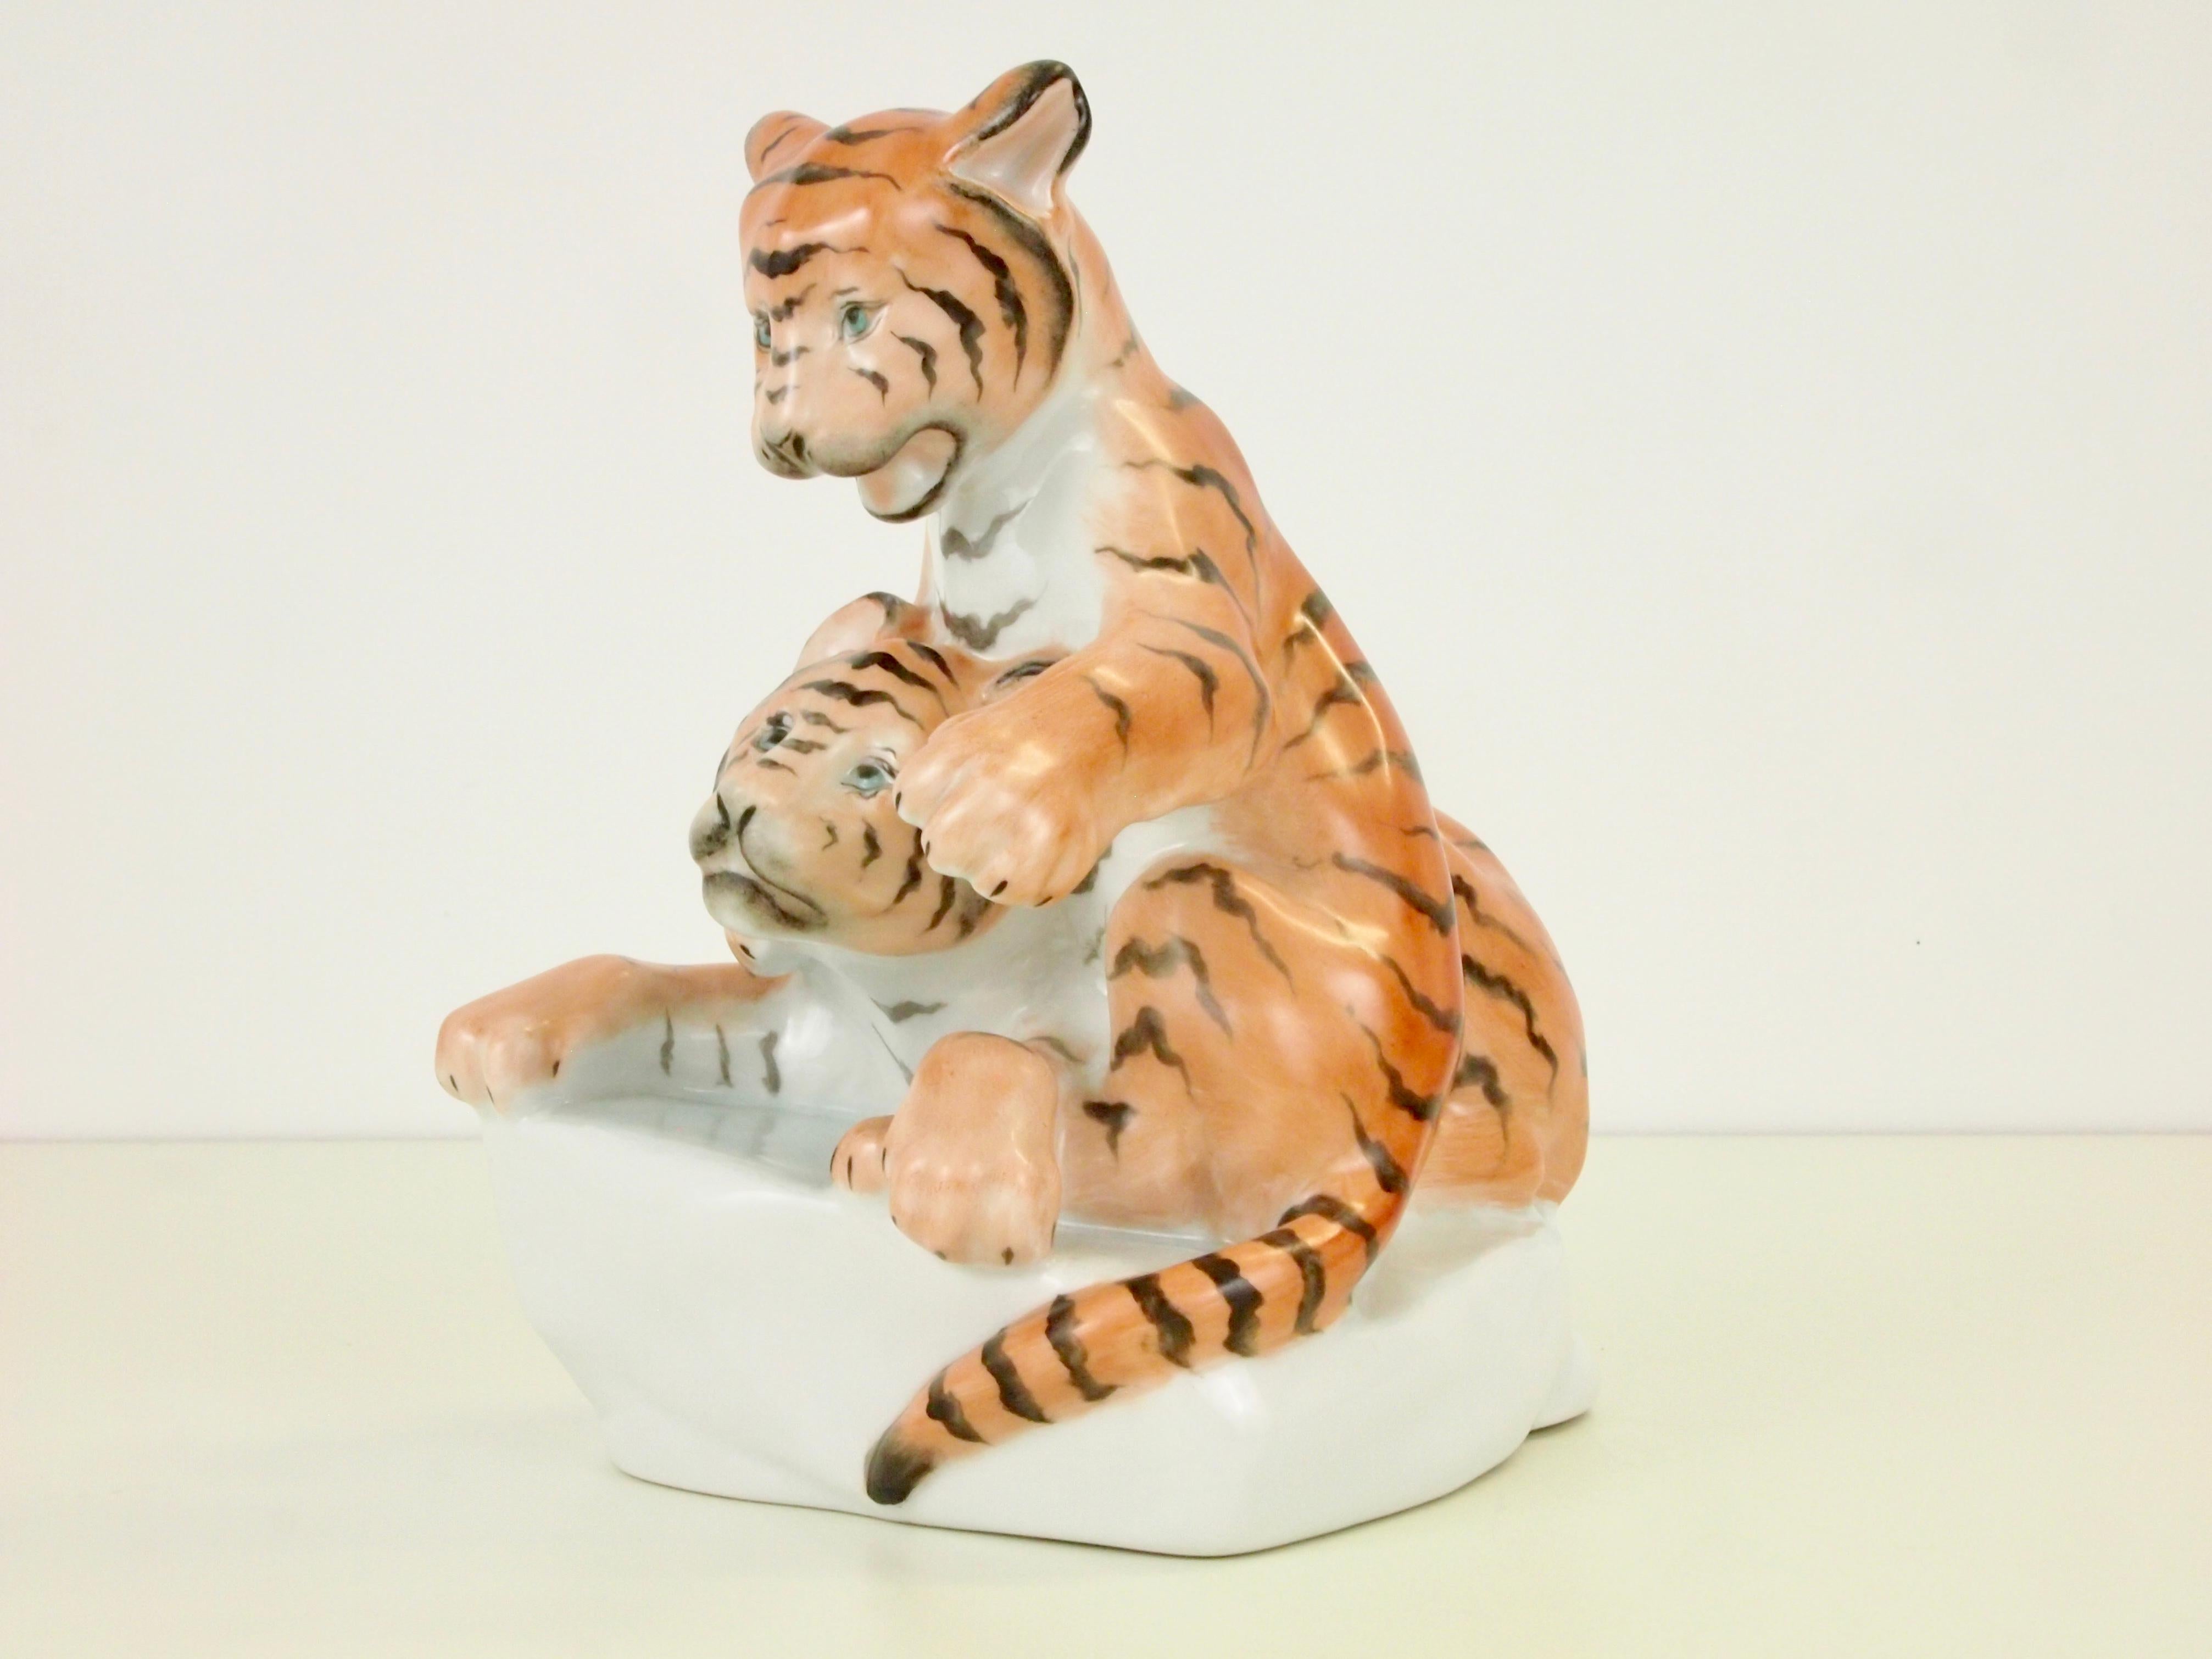 Vintage midcentury porcelain figurine by Herend depicting a couple young tiger cubs playing joyfully together.

Herend was founded in 1826 and has had much famous customers who bought its porcelain. At the first World's Fair the porcelain